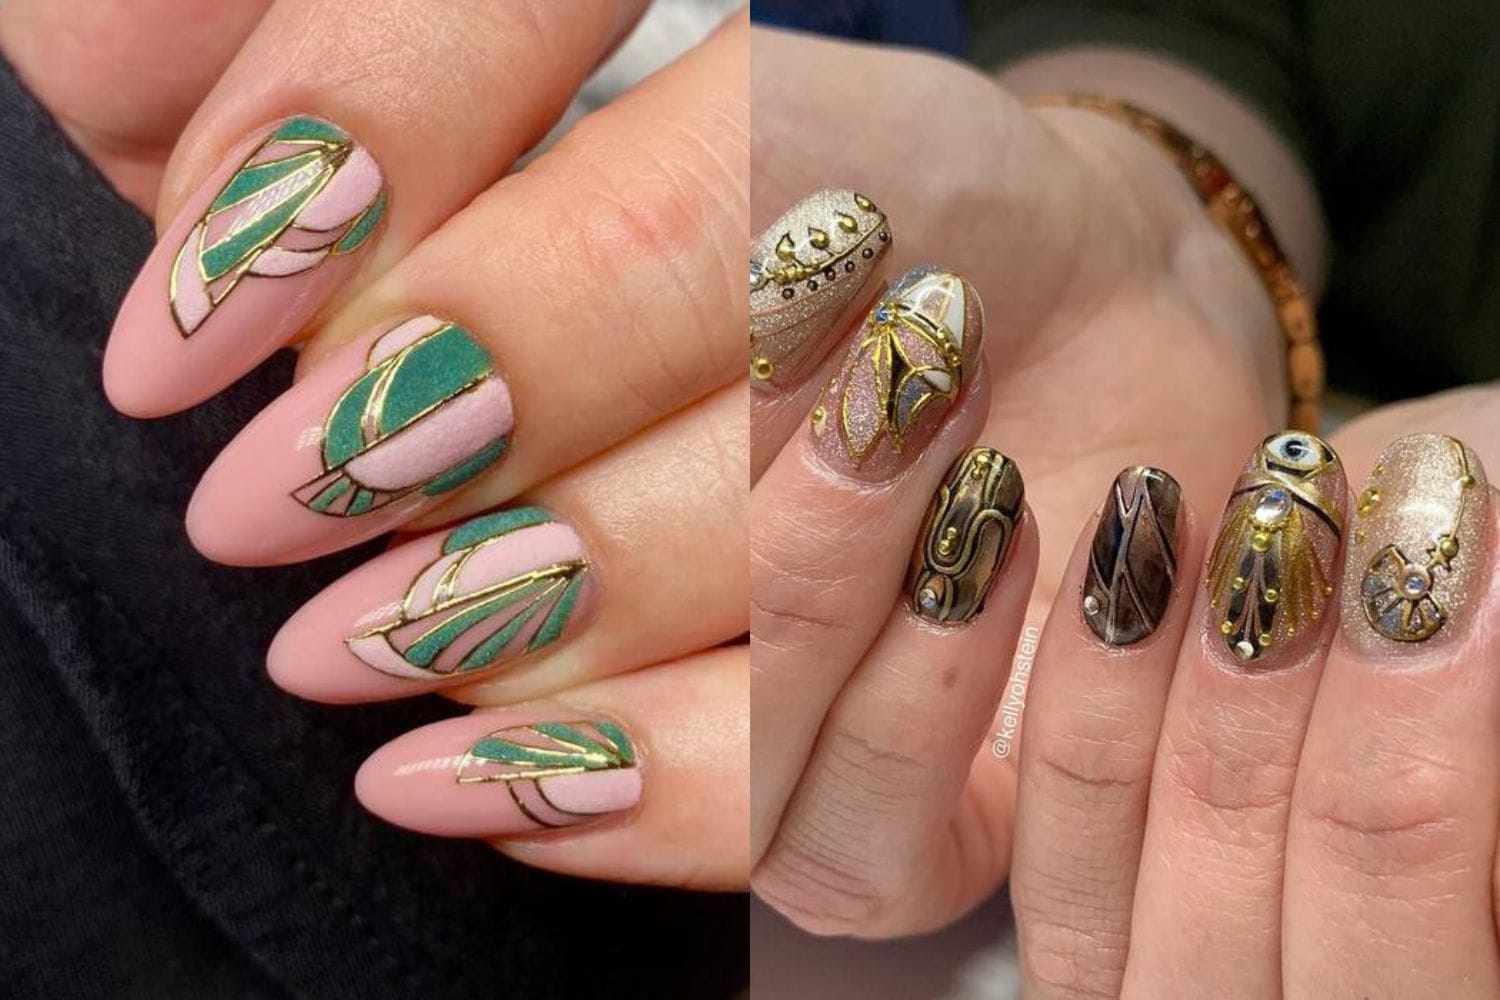 Nail Art Is Now Hand Art - The New York Times